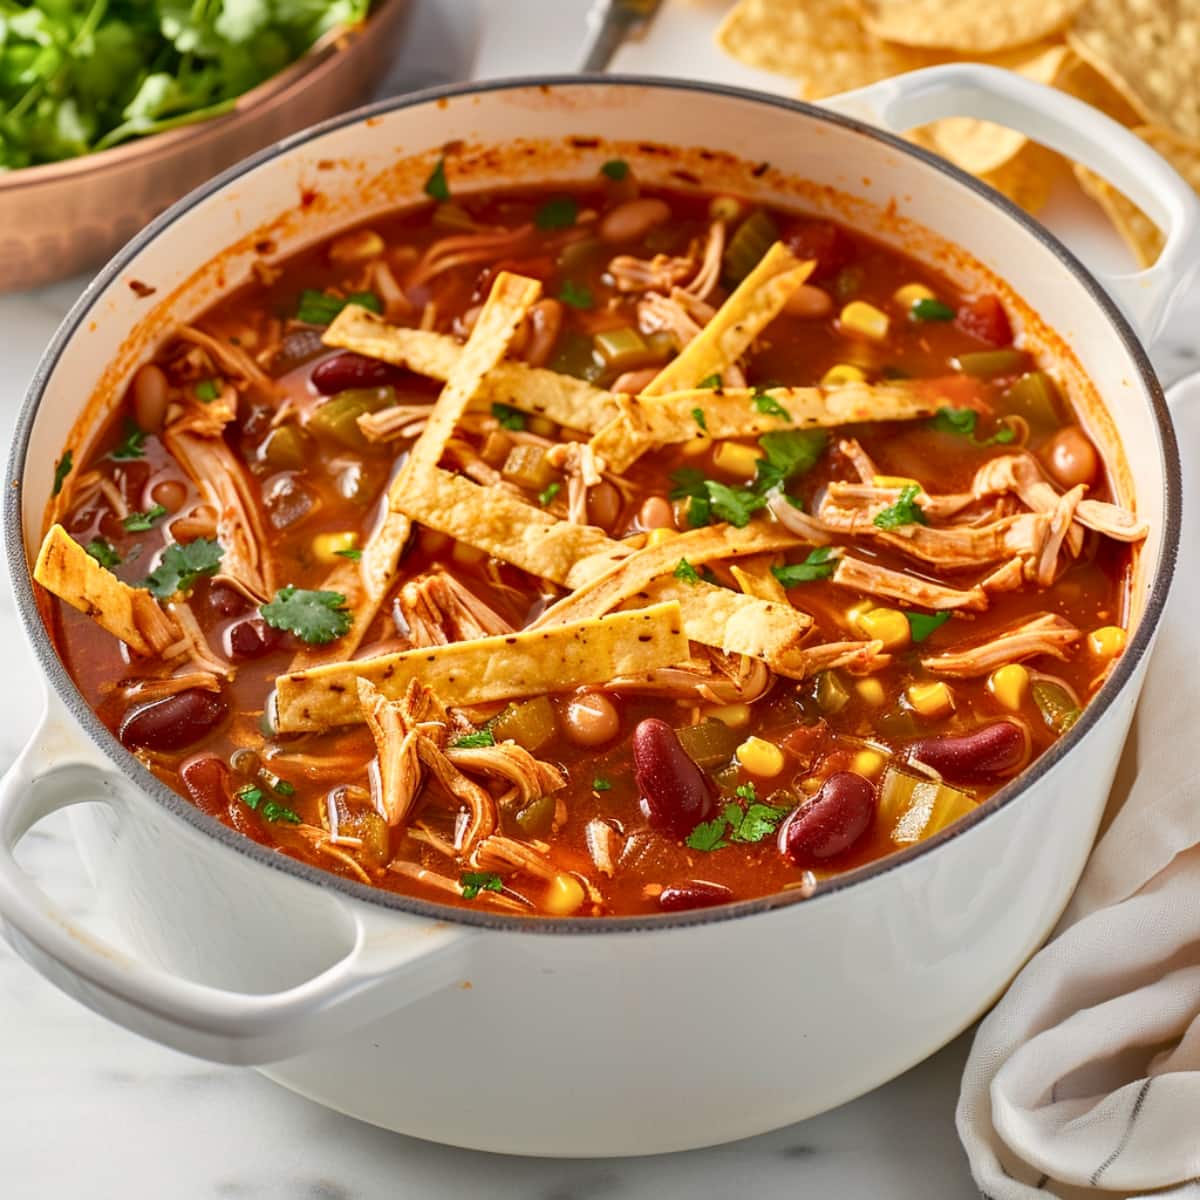 Chicken tortilla soup cooked in a white pot.